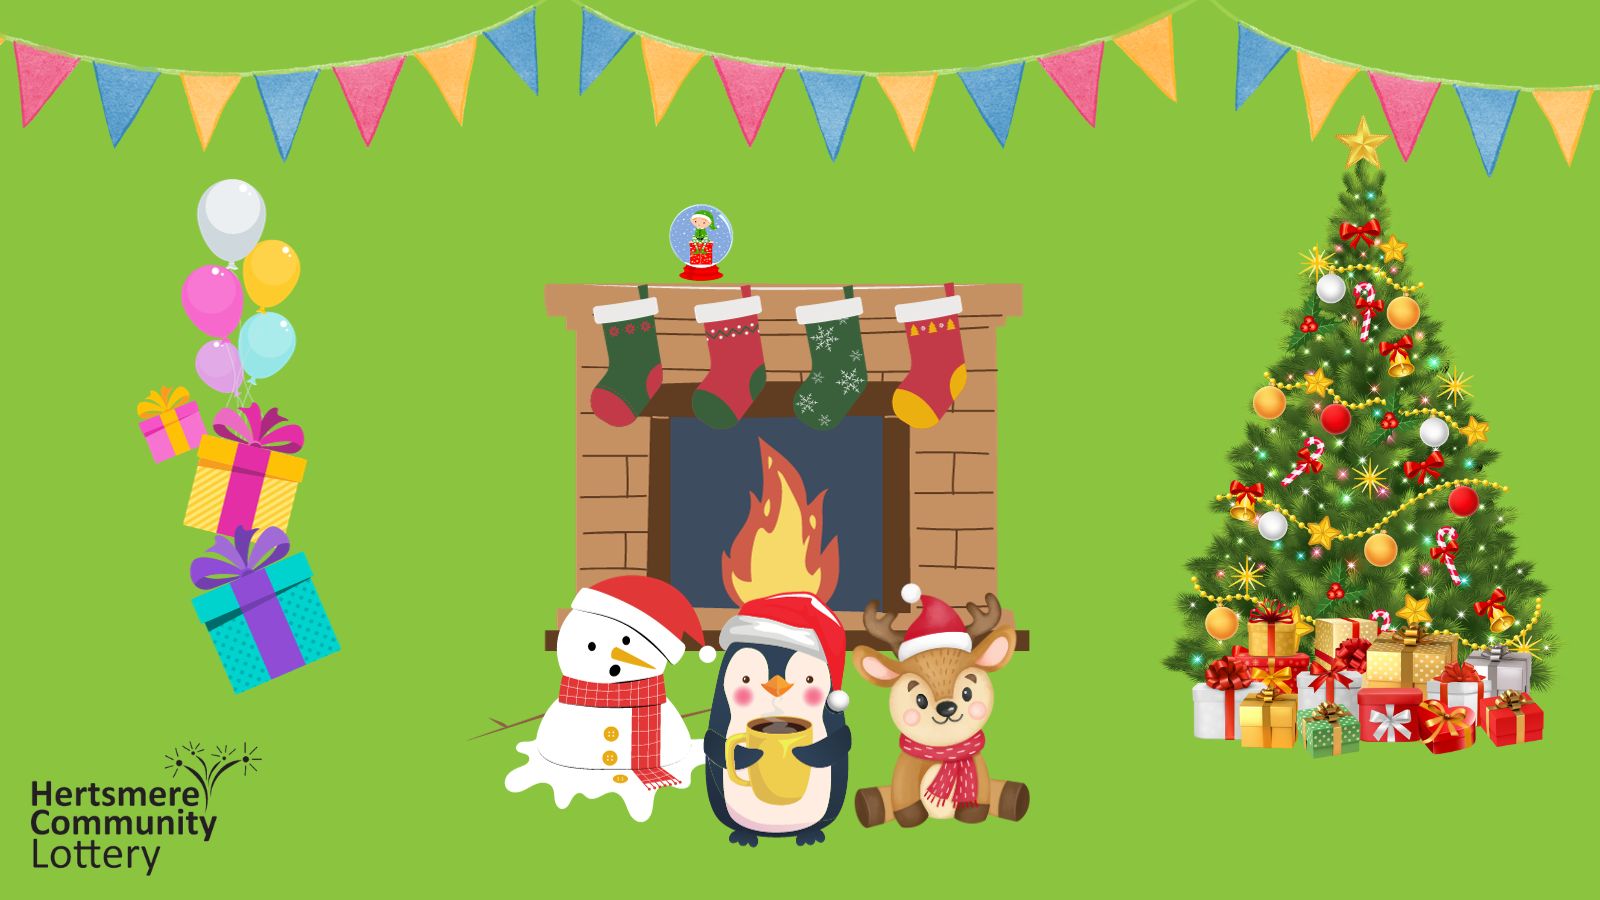 Fireplace snowman melting penguin & reindeer sitting in front. Christmas tree to the right and balloons presents on left